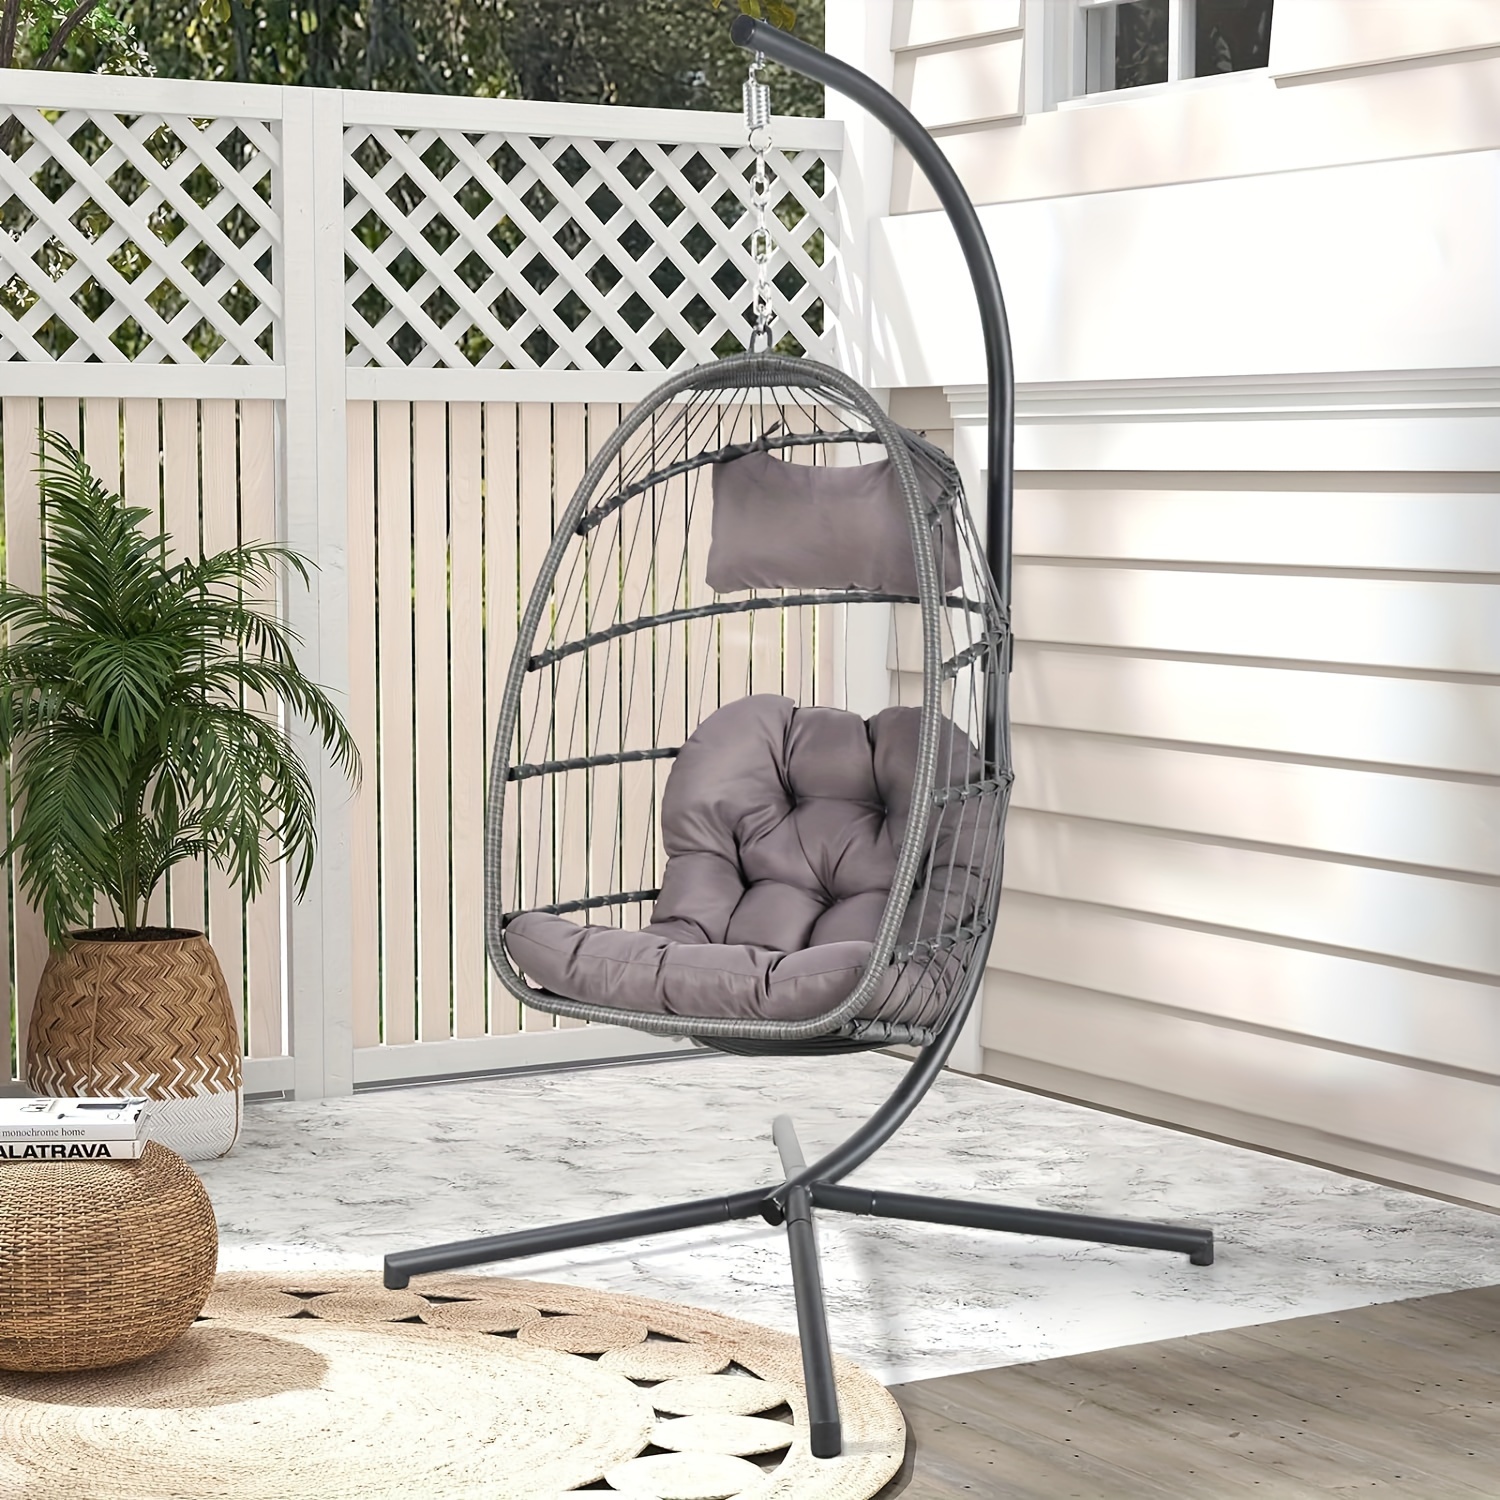 

Hanging Egg Swing Chair With Stand And Weather Cover, Foldable For Indoor Outdoor, Wicker Rattan Basket With Cushion For Bedroom, Patio, Porch